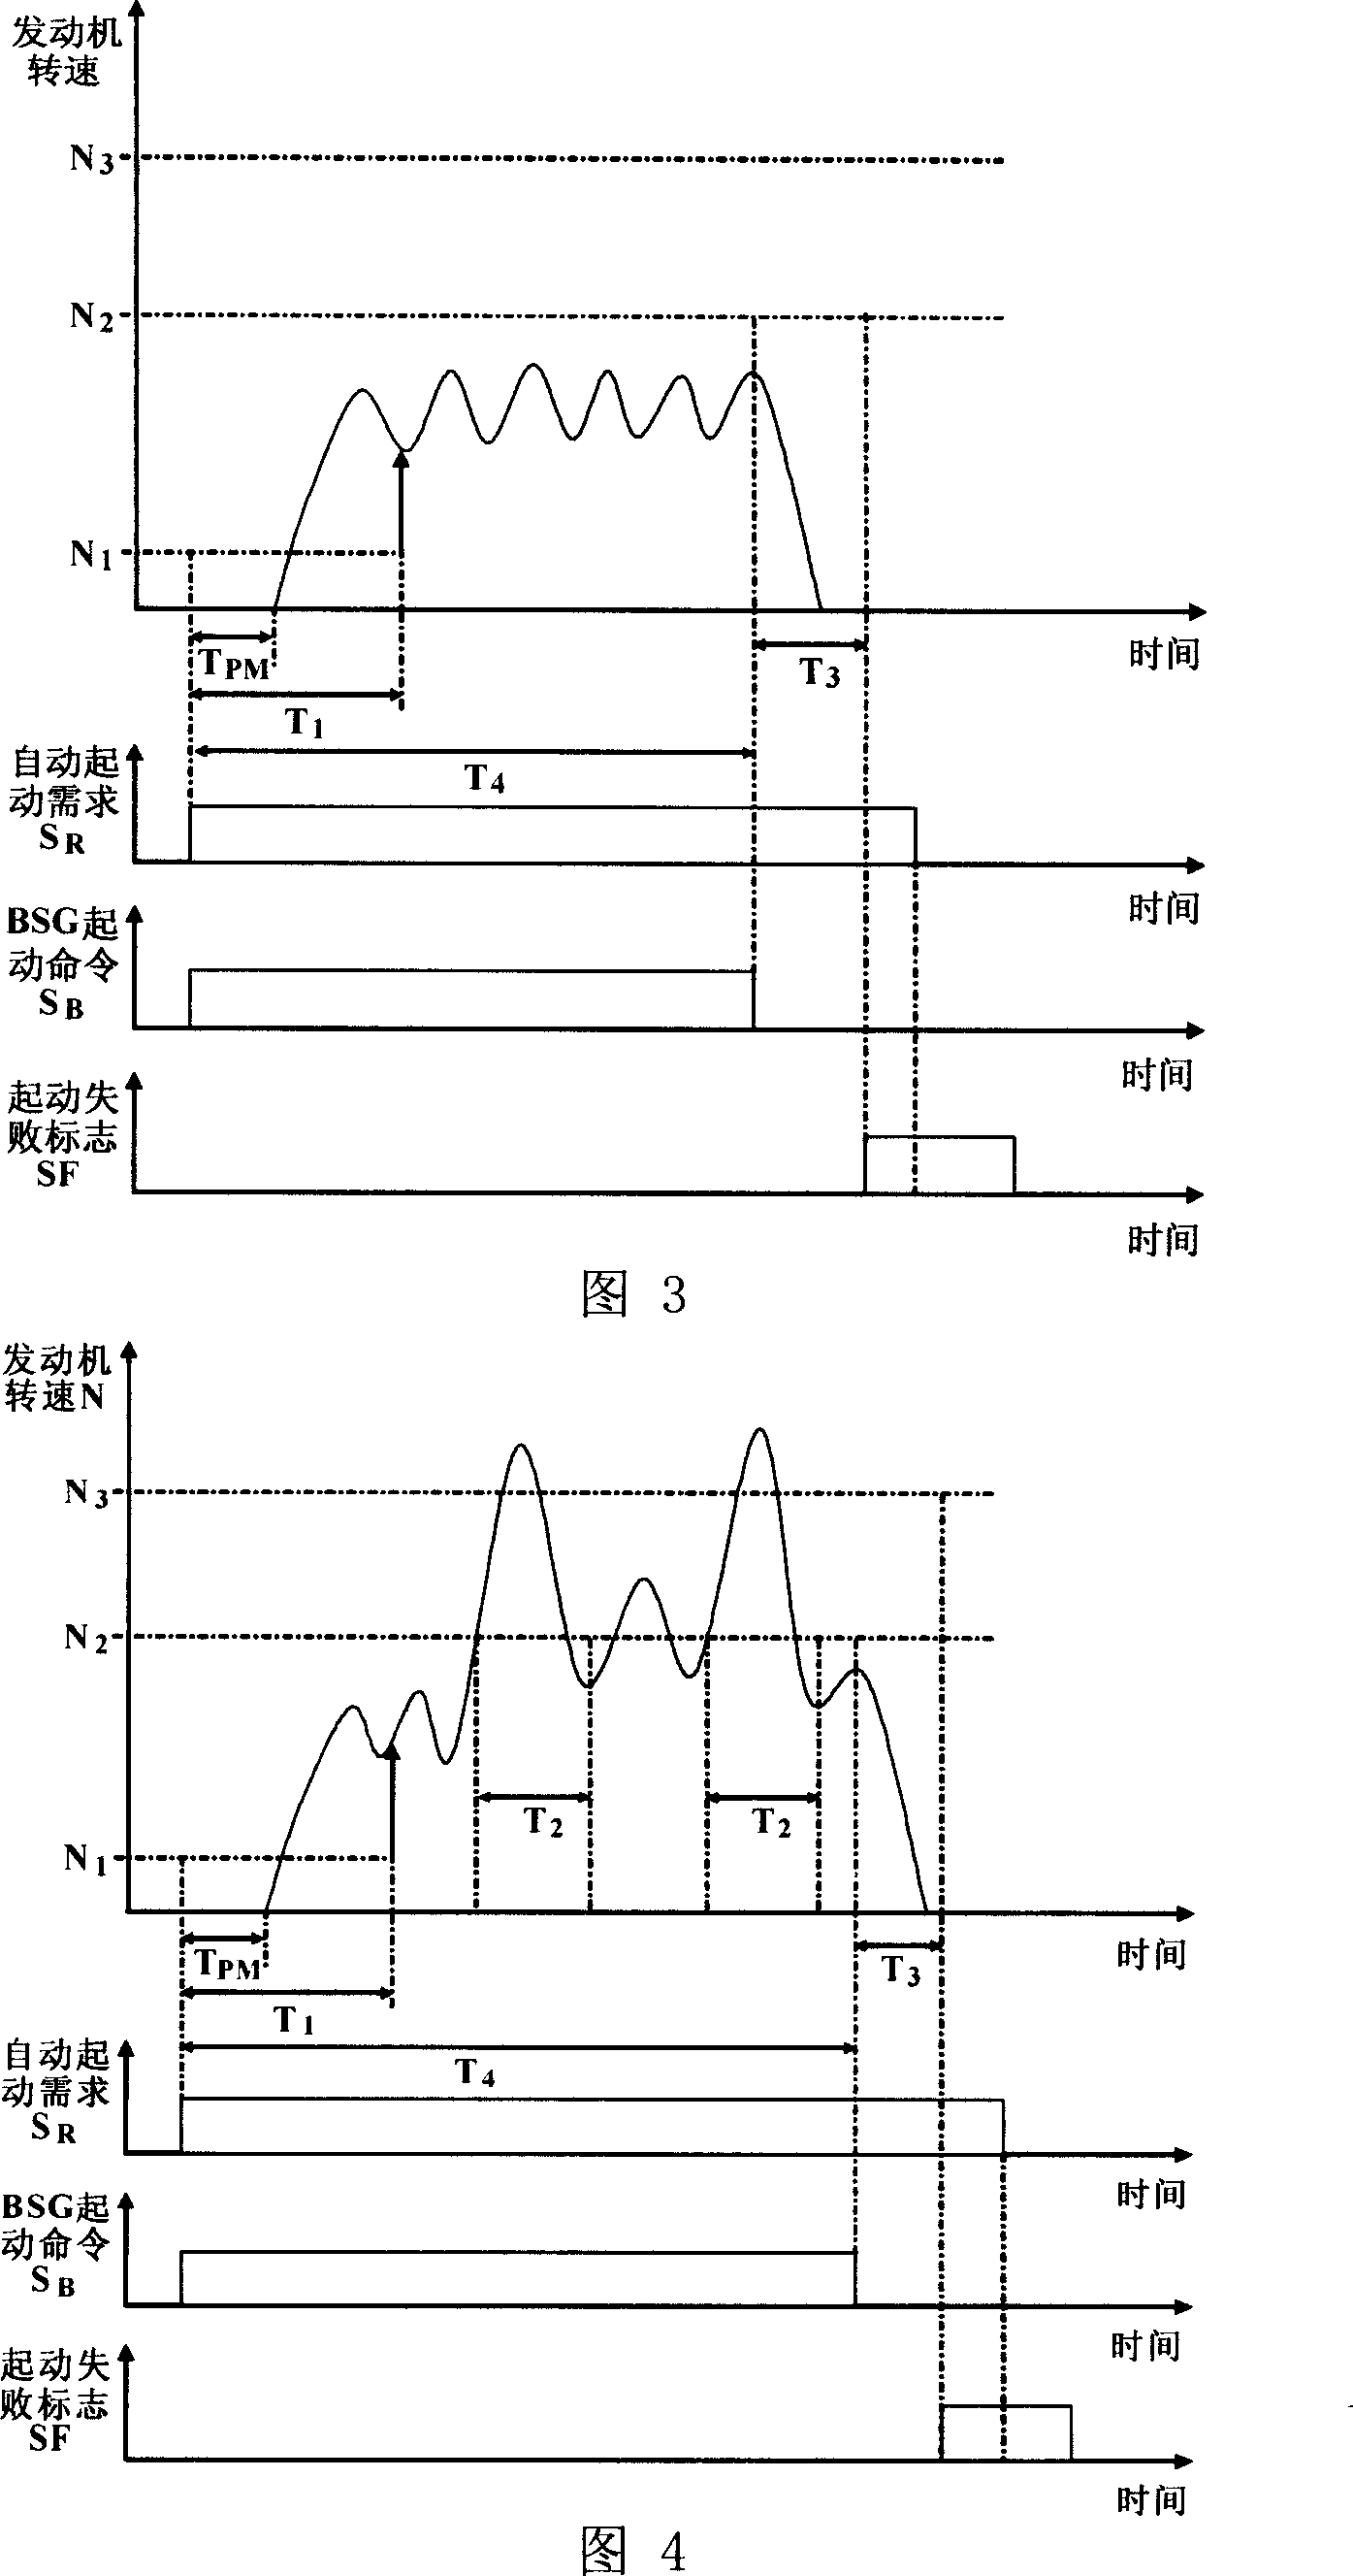 Method for controlling engine starting of blended power electric automobile